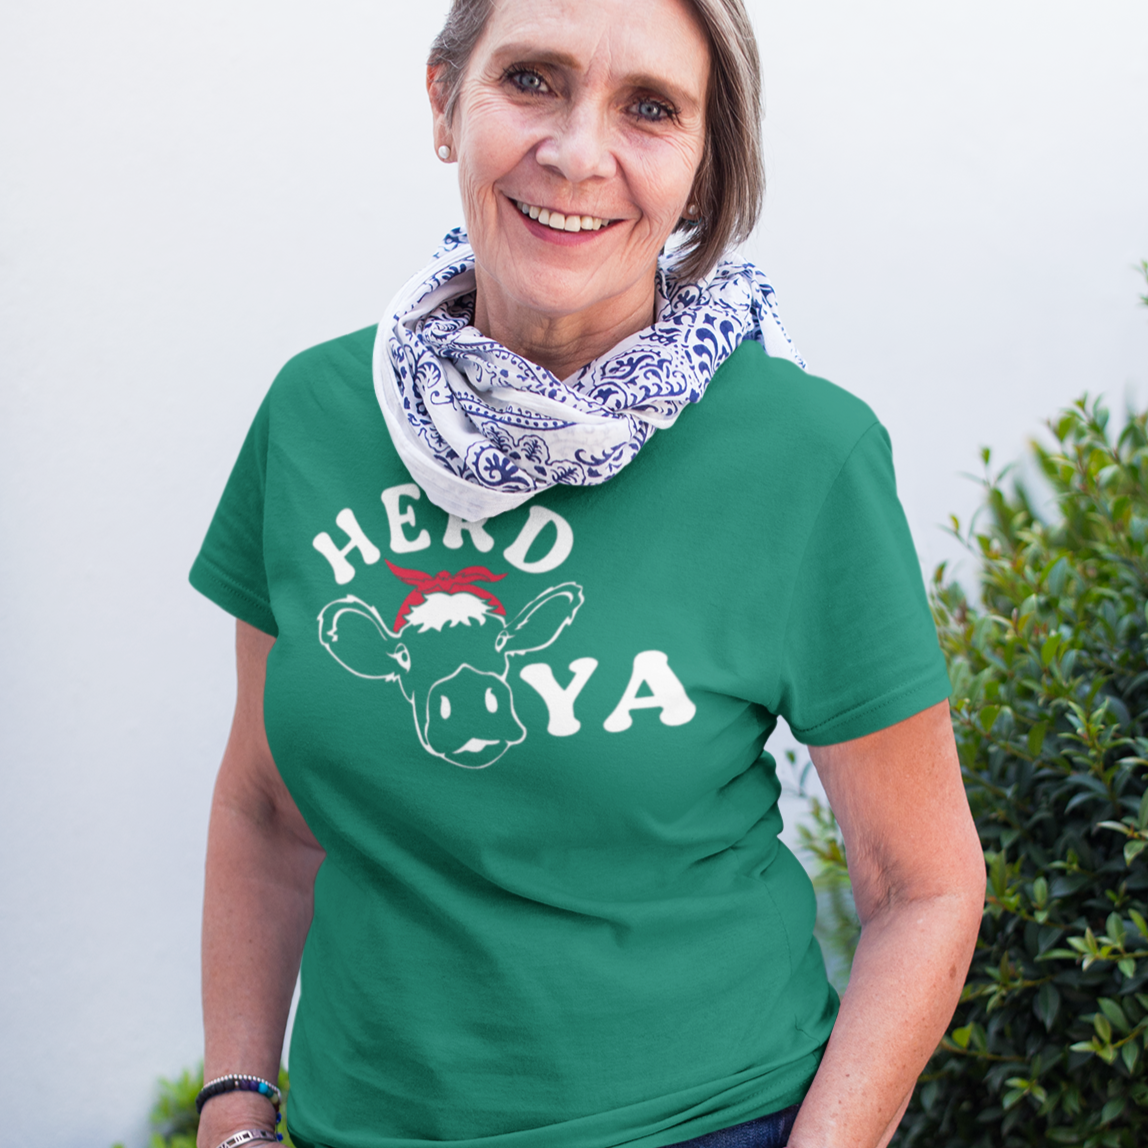 herd-ya-heather-kelly-green-t-shirt-cowgirl-senior-woman-wearing-a-round-neck-tee-mockup-against-plants